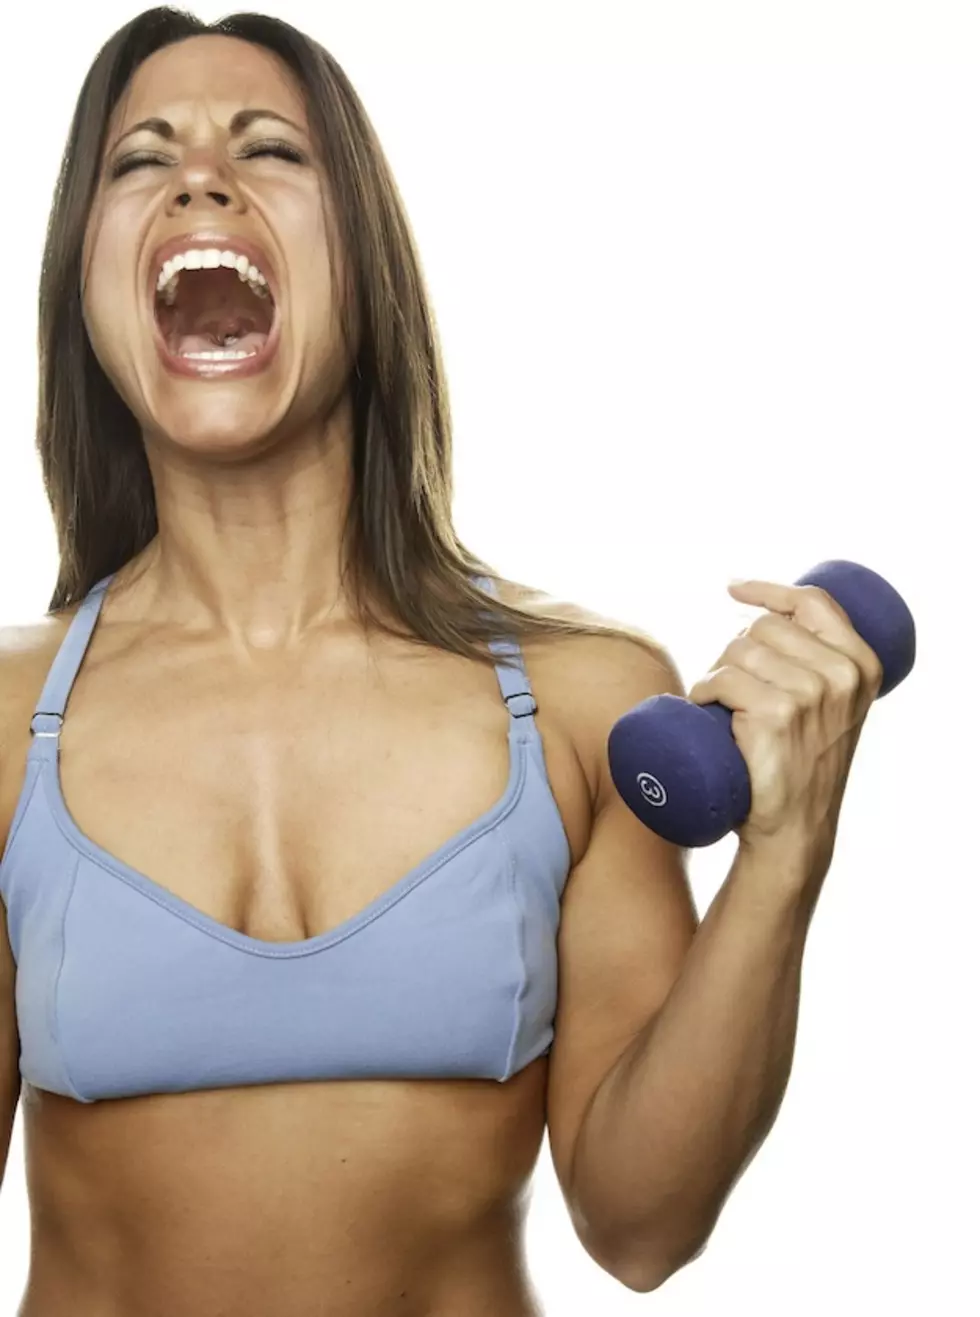 Bad News Guys — Women Can Exercise Their Way To Orgasm